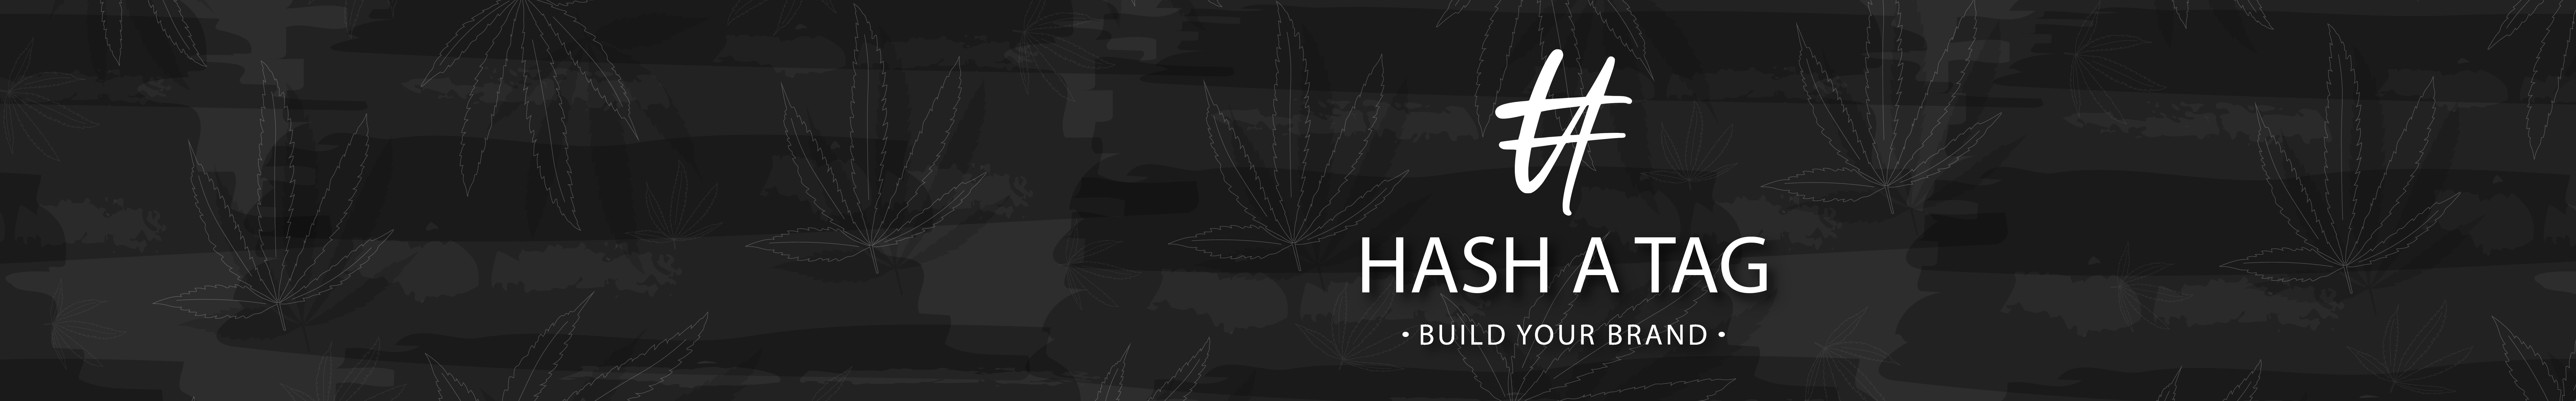 Hash A Tag's profile banner